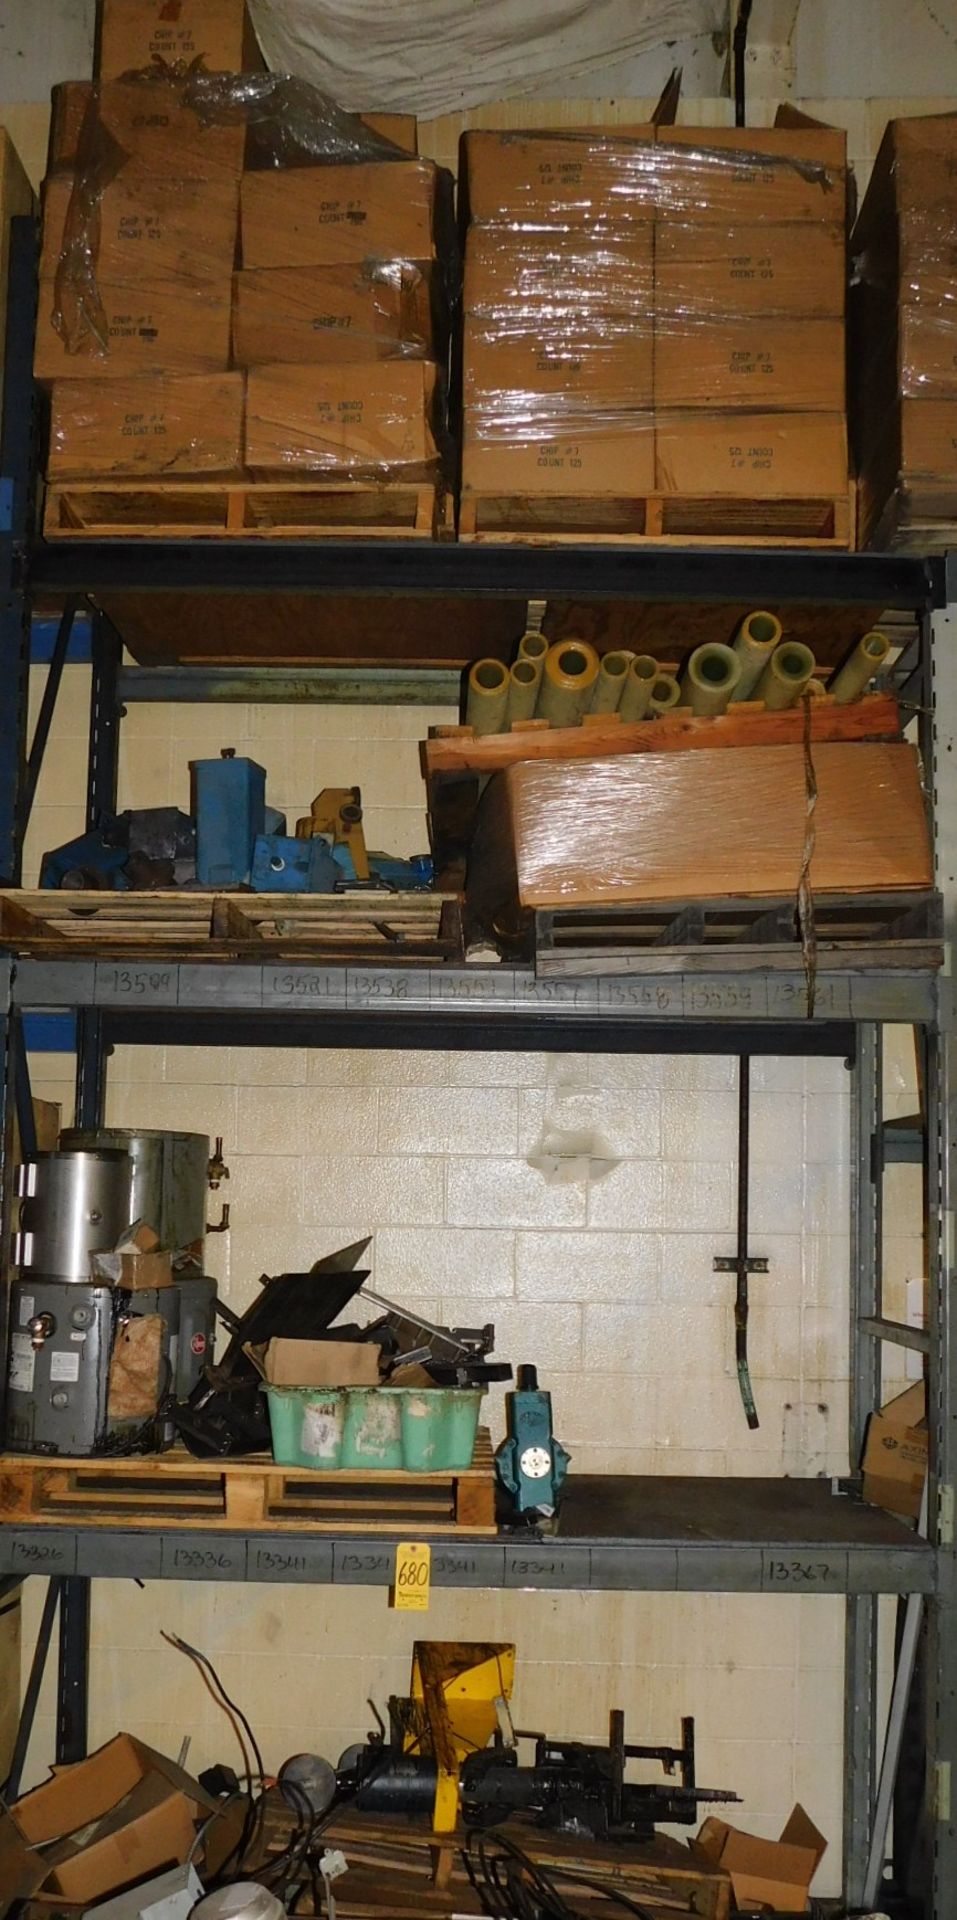 Contents of (1) Section of Pallet Shelving